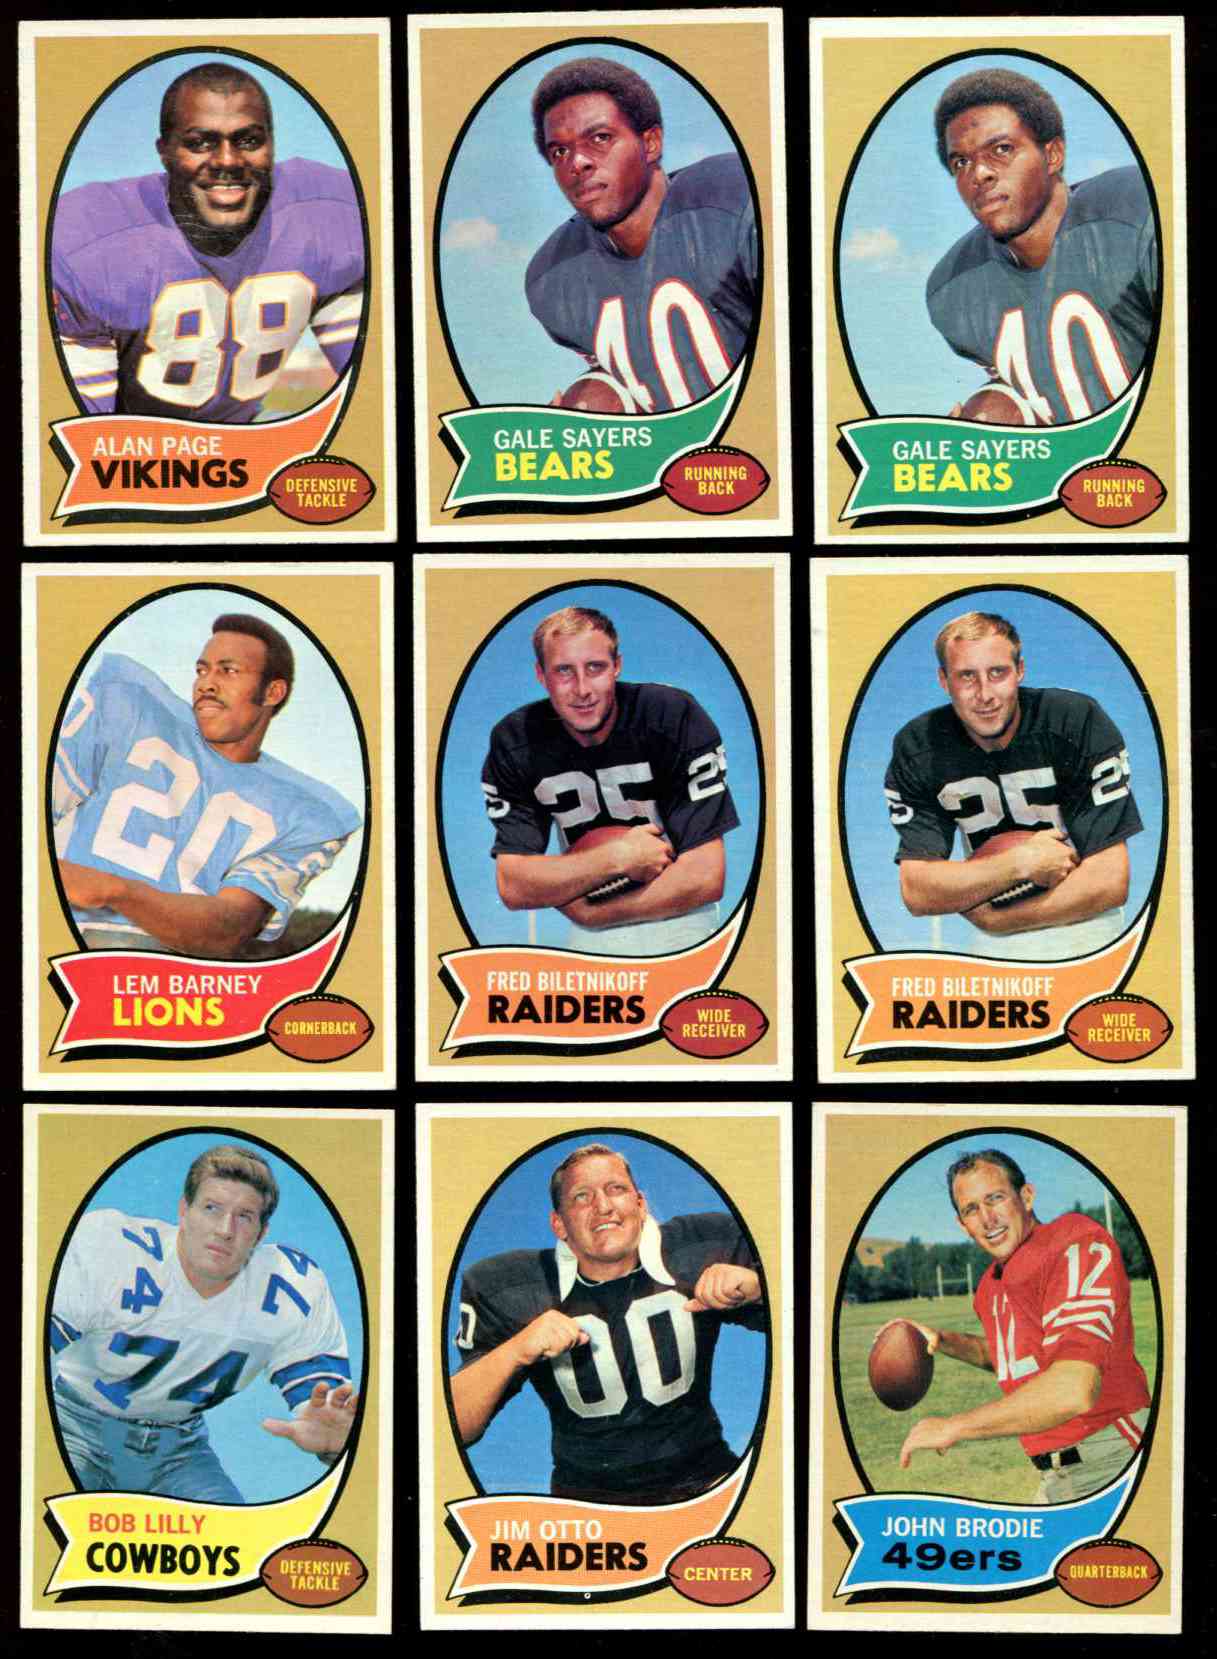 1970 Topps FB #130 John Brodie (49ers) Football cards value